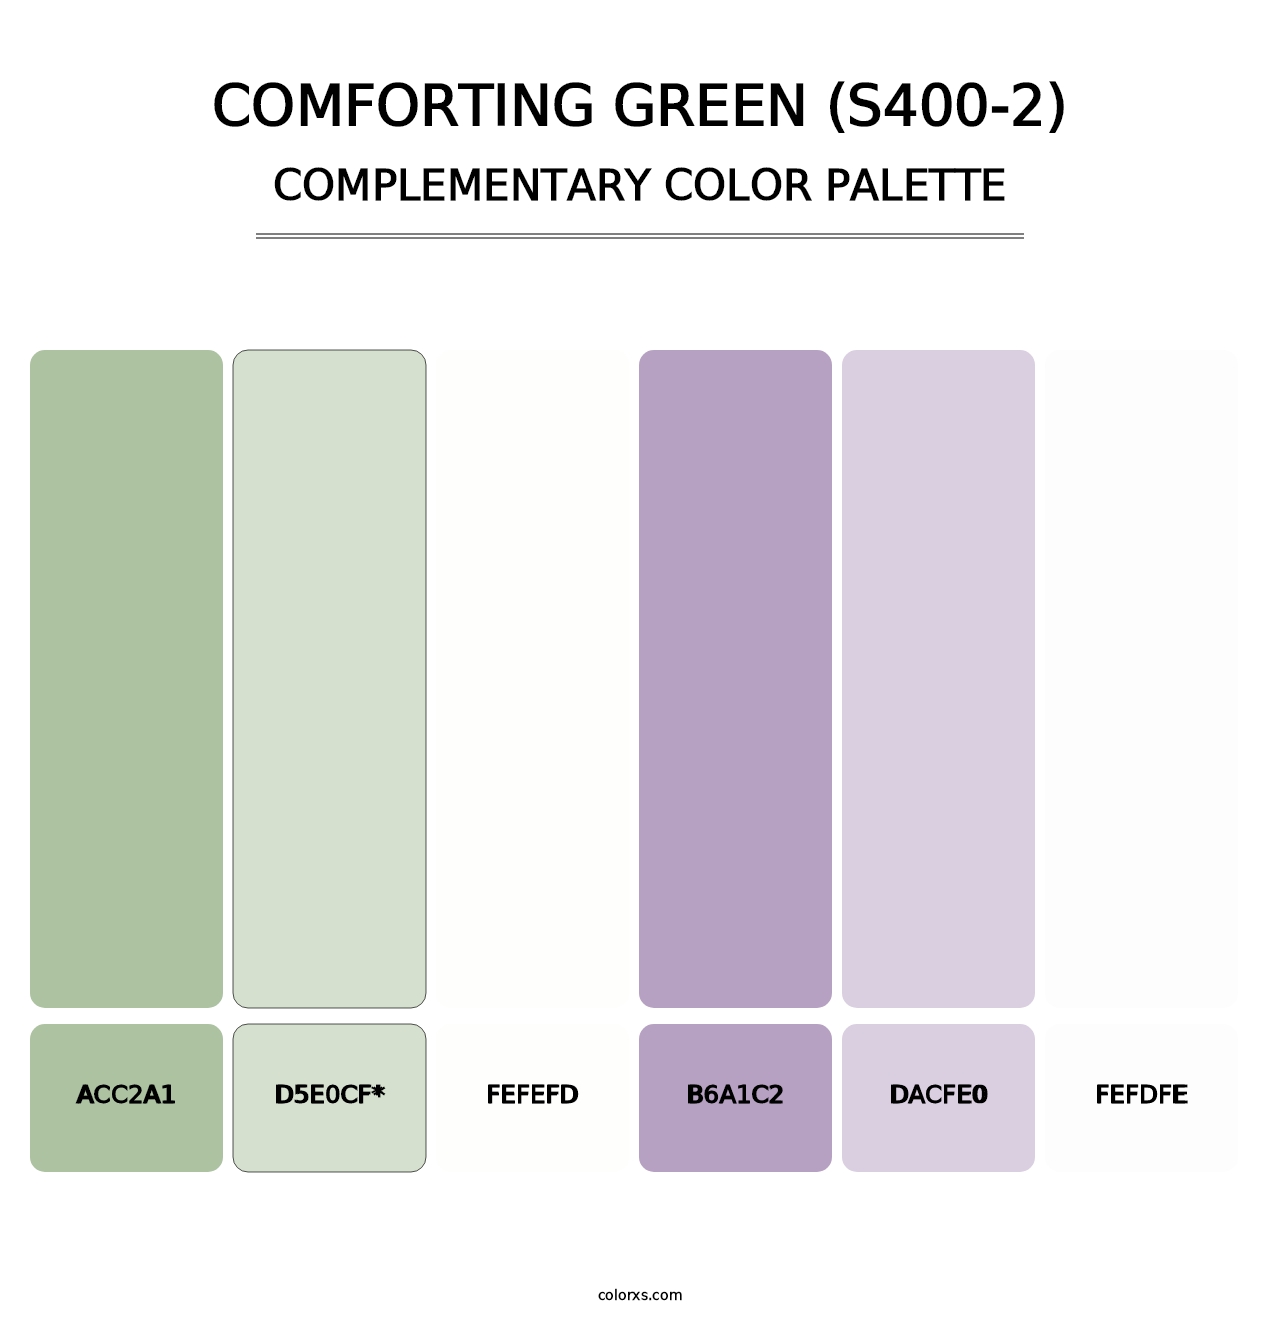 Comforting Green (S400-2) - Complementary Color Palette